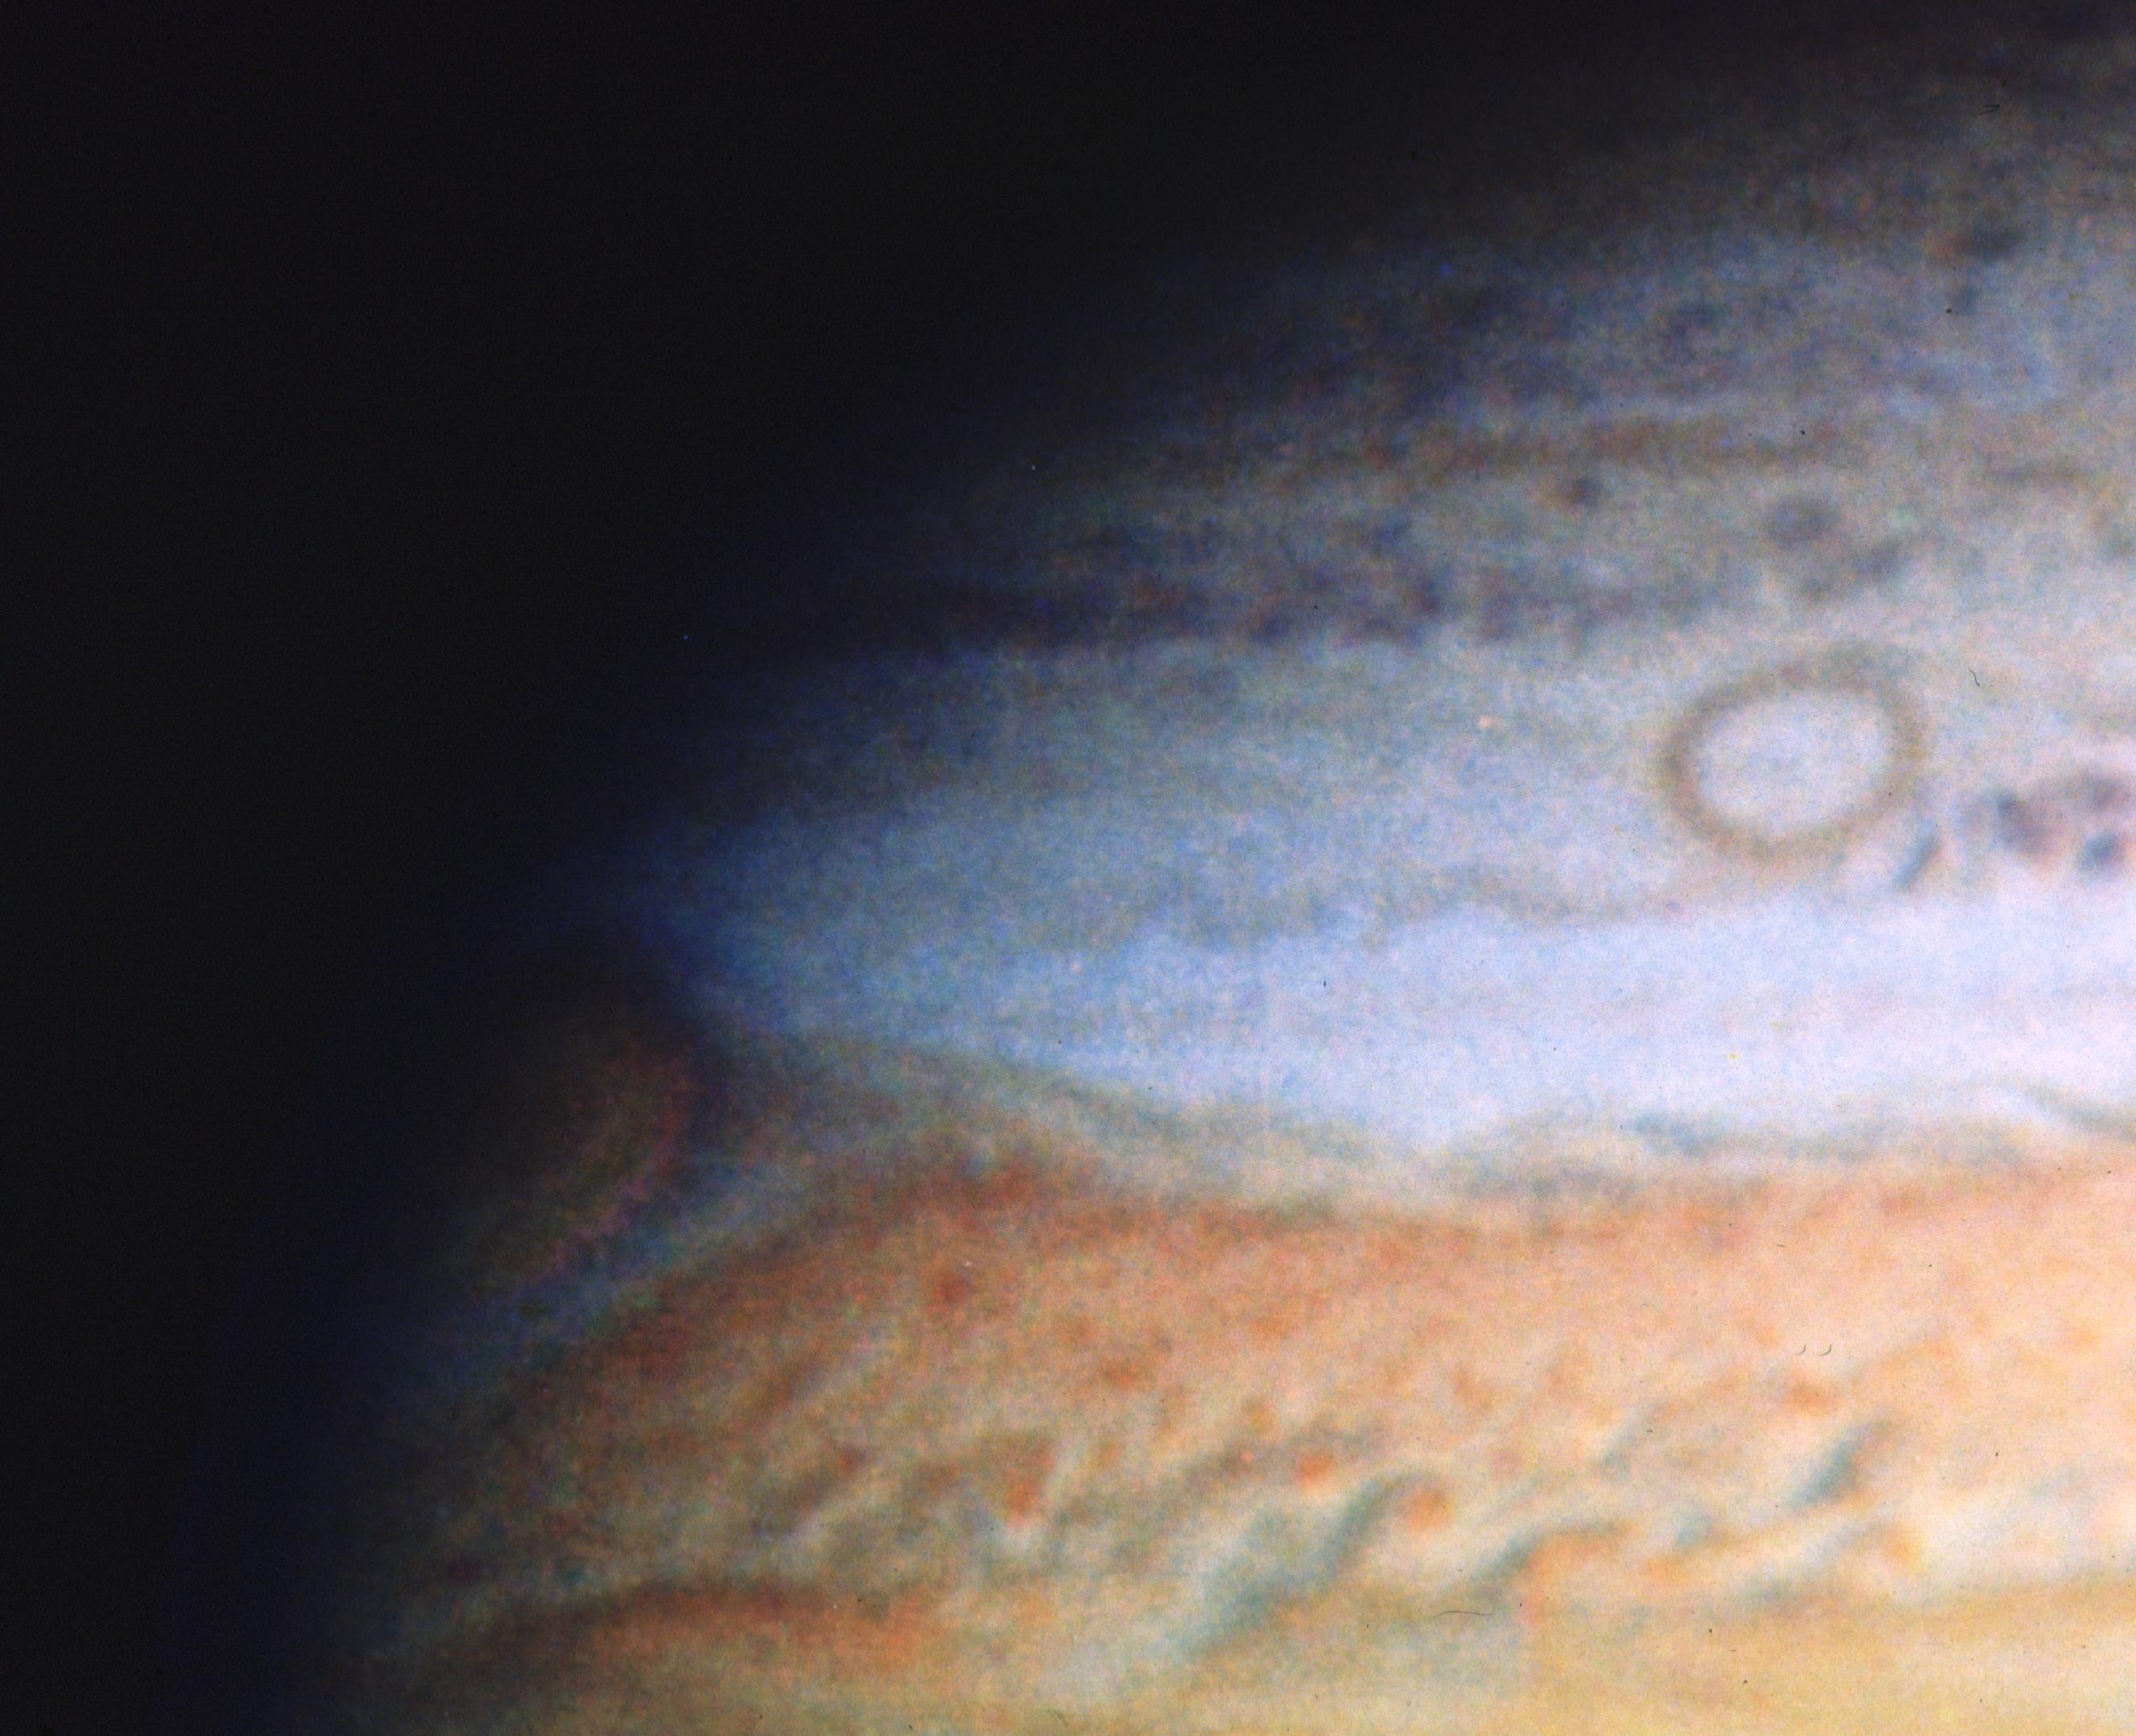 Only a quarter of the planet Jupiter is visible extending from the lower-right corner across the image. Colors of orange, rusty-red, and white bands.